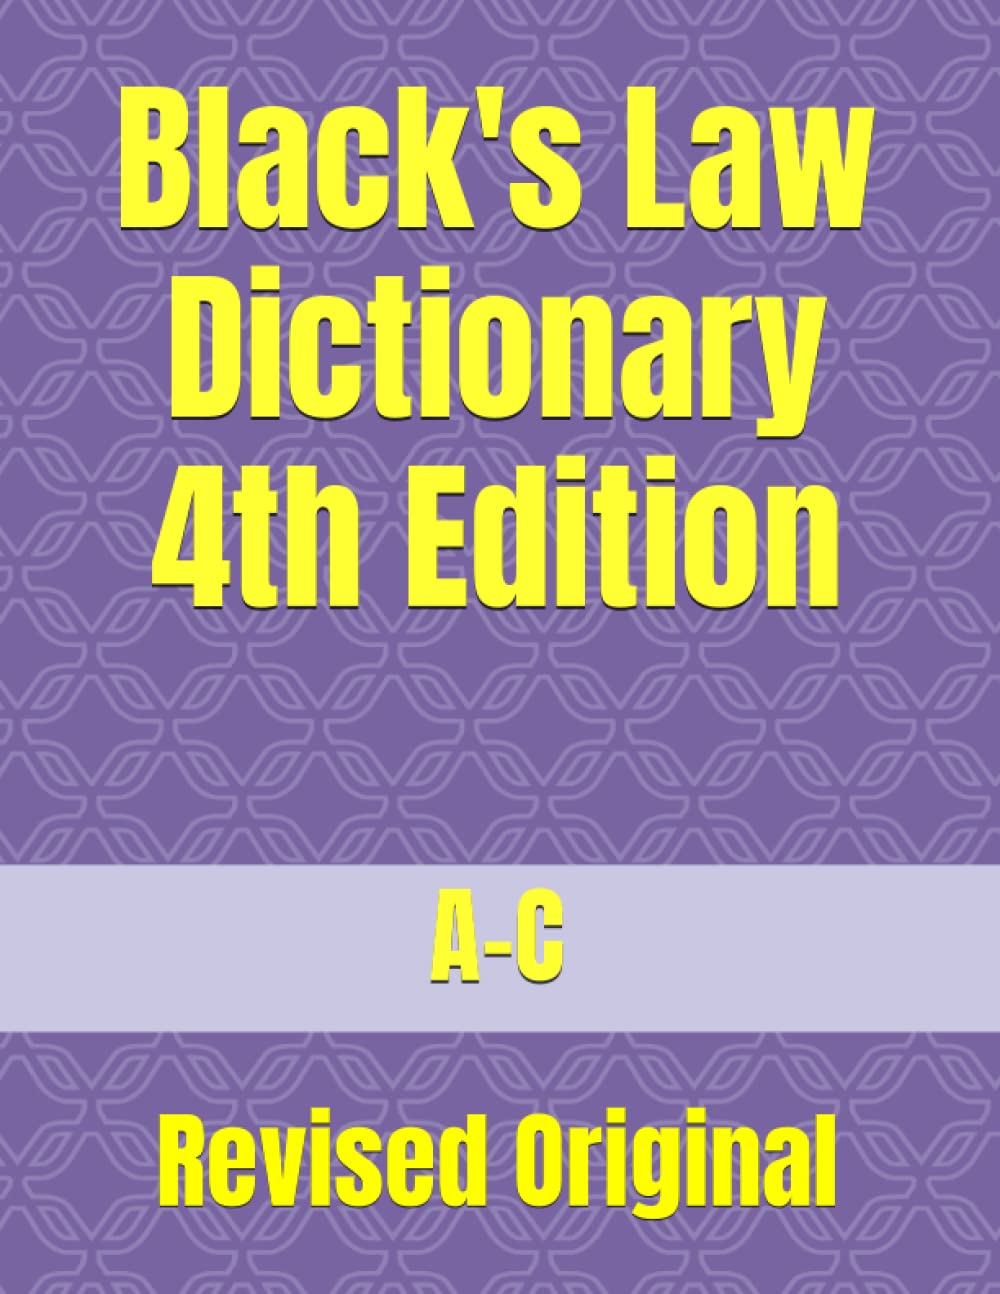 Black's Law Dictionary 4th Edition: Revised Original